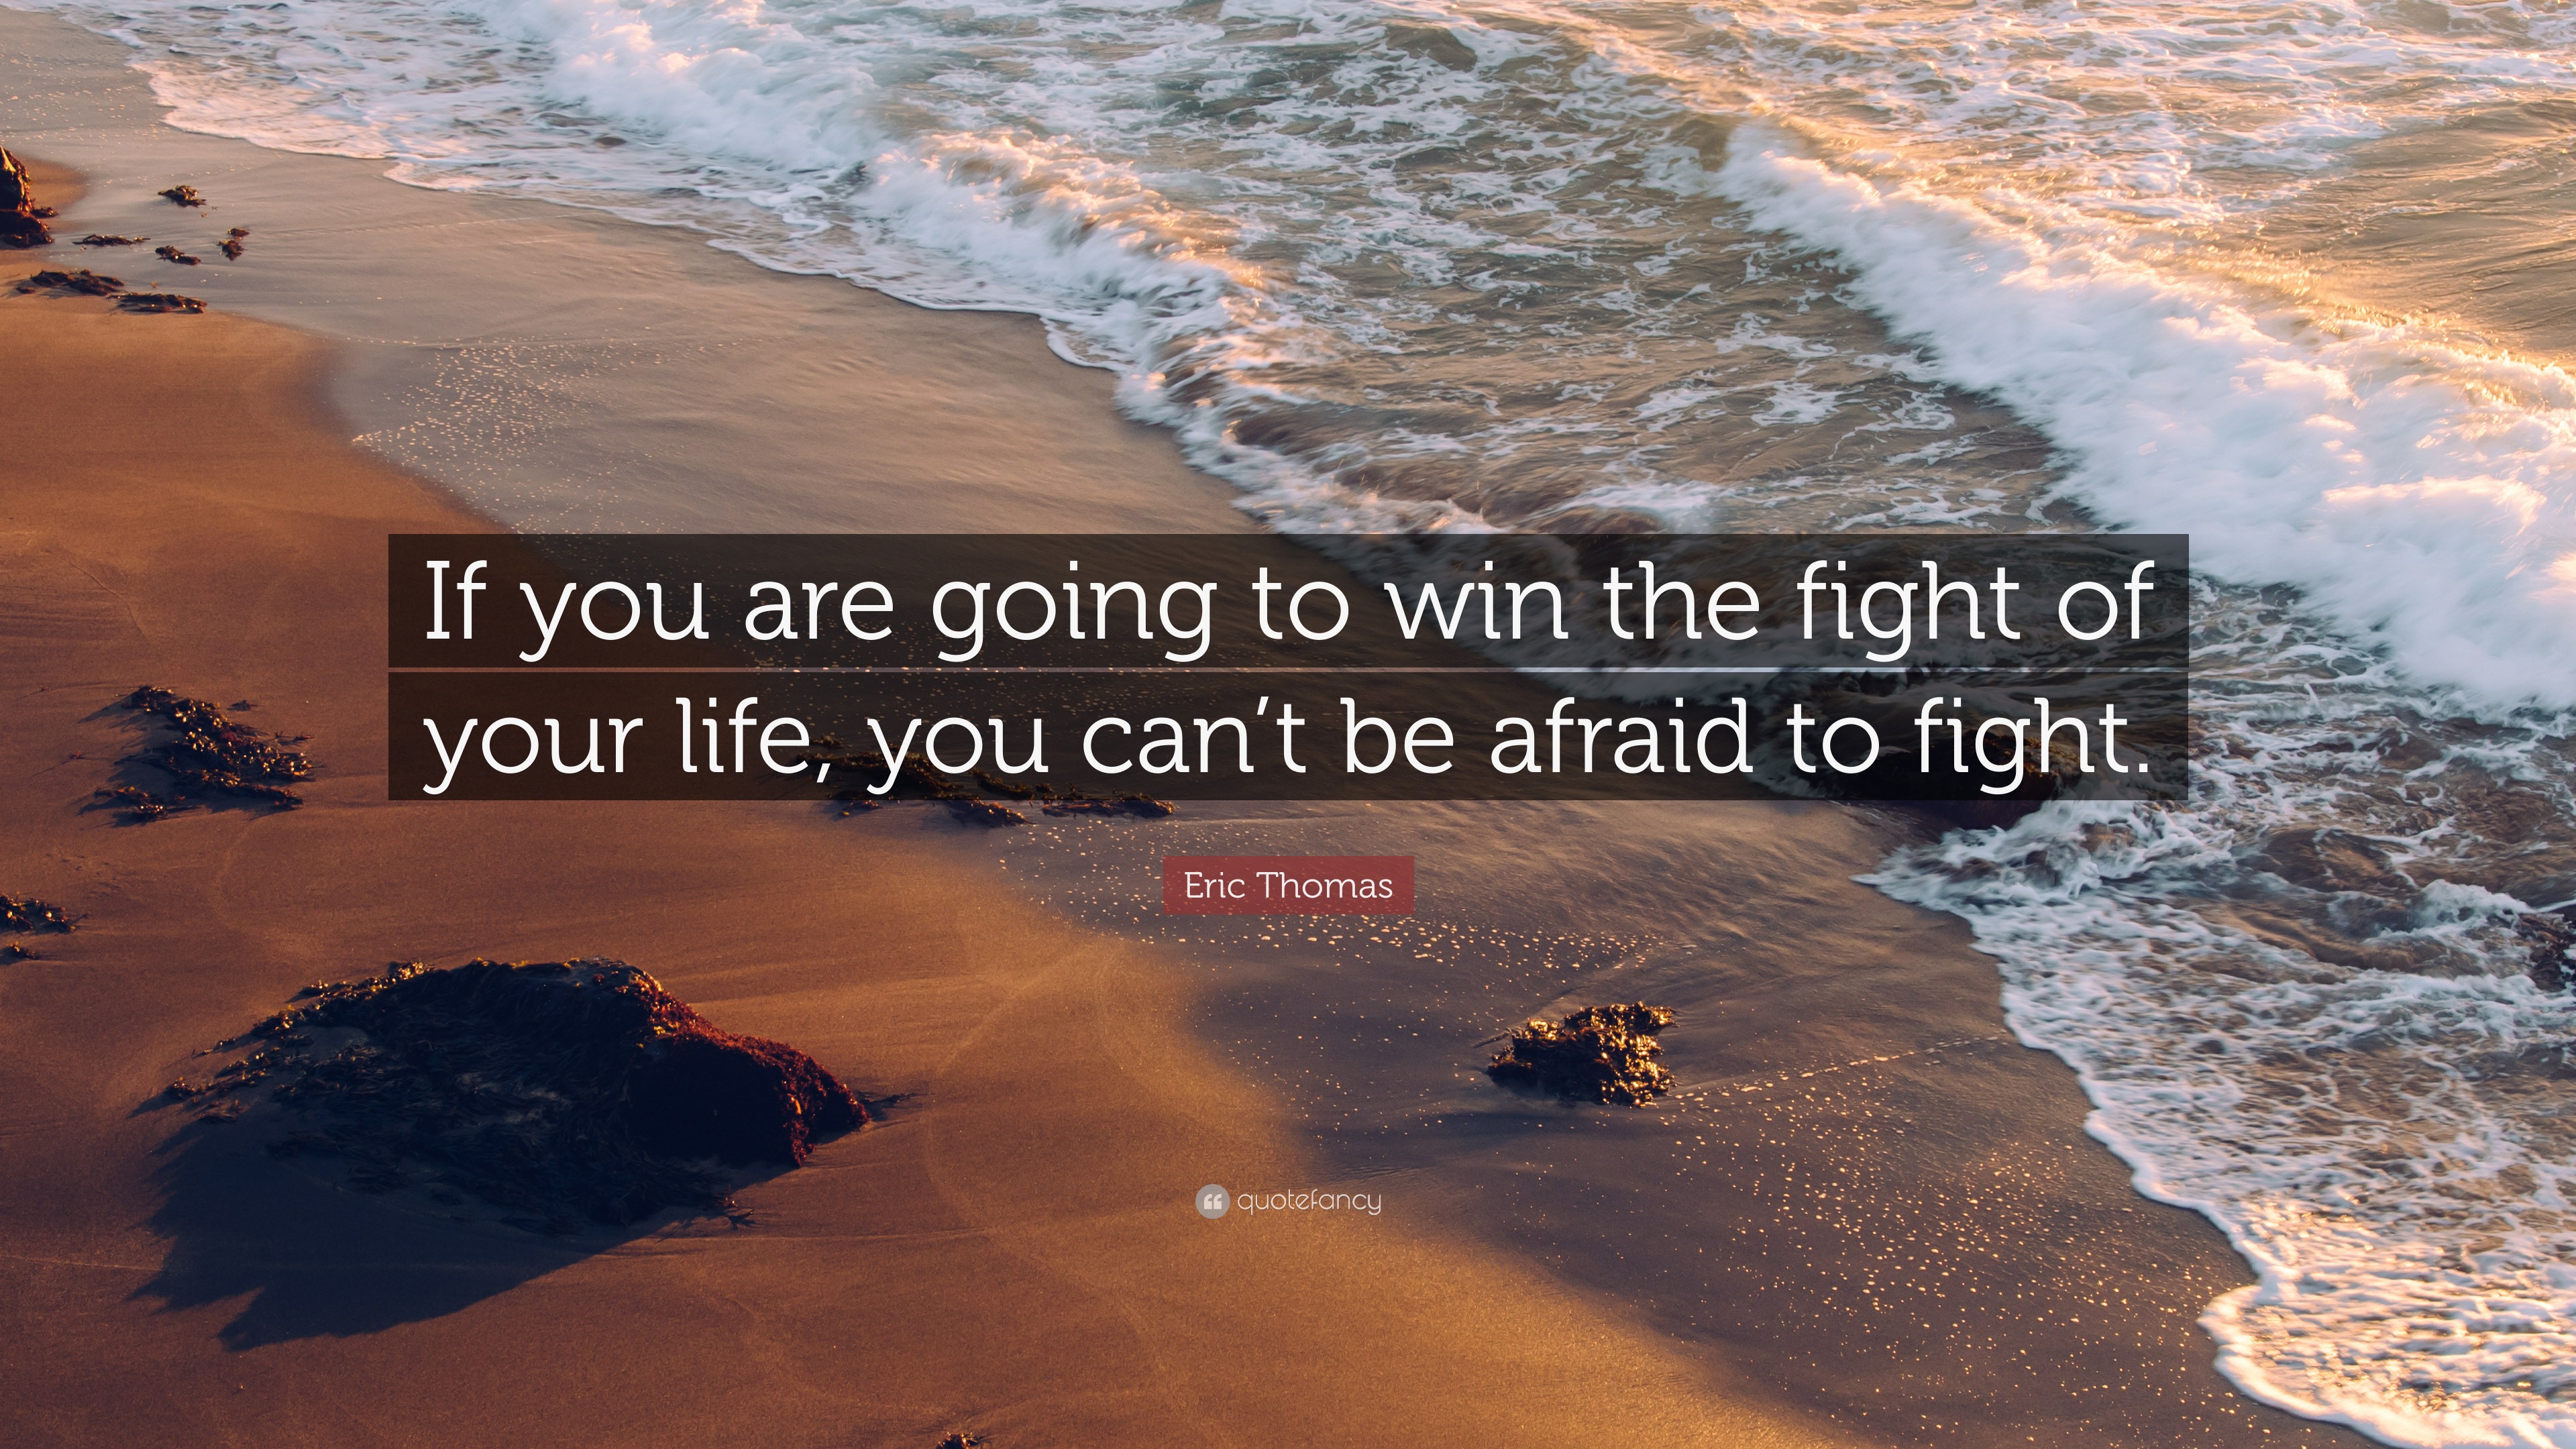 Eric Thomas Quote: “If you are going to win the fight of your life, you ...